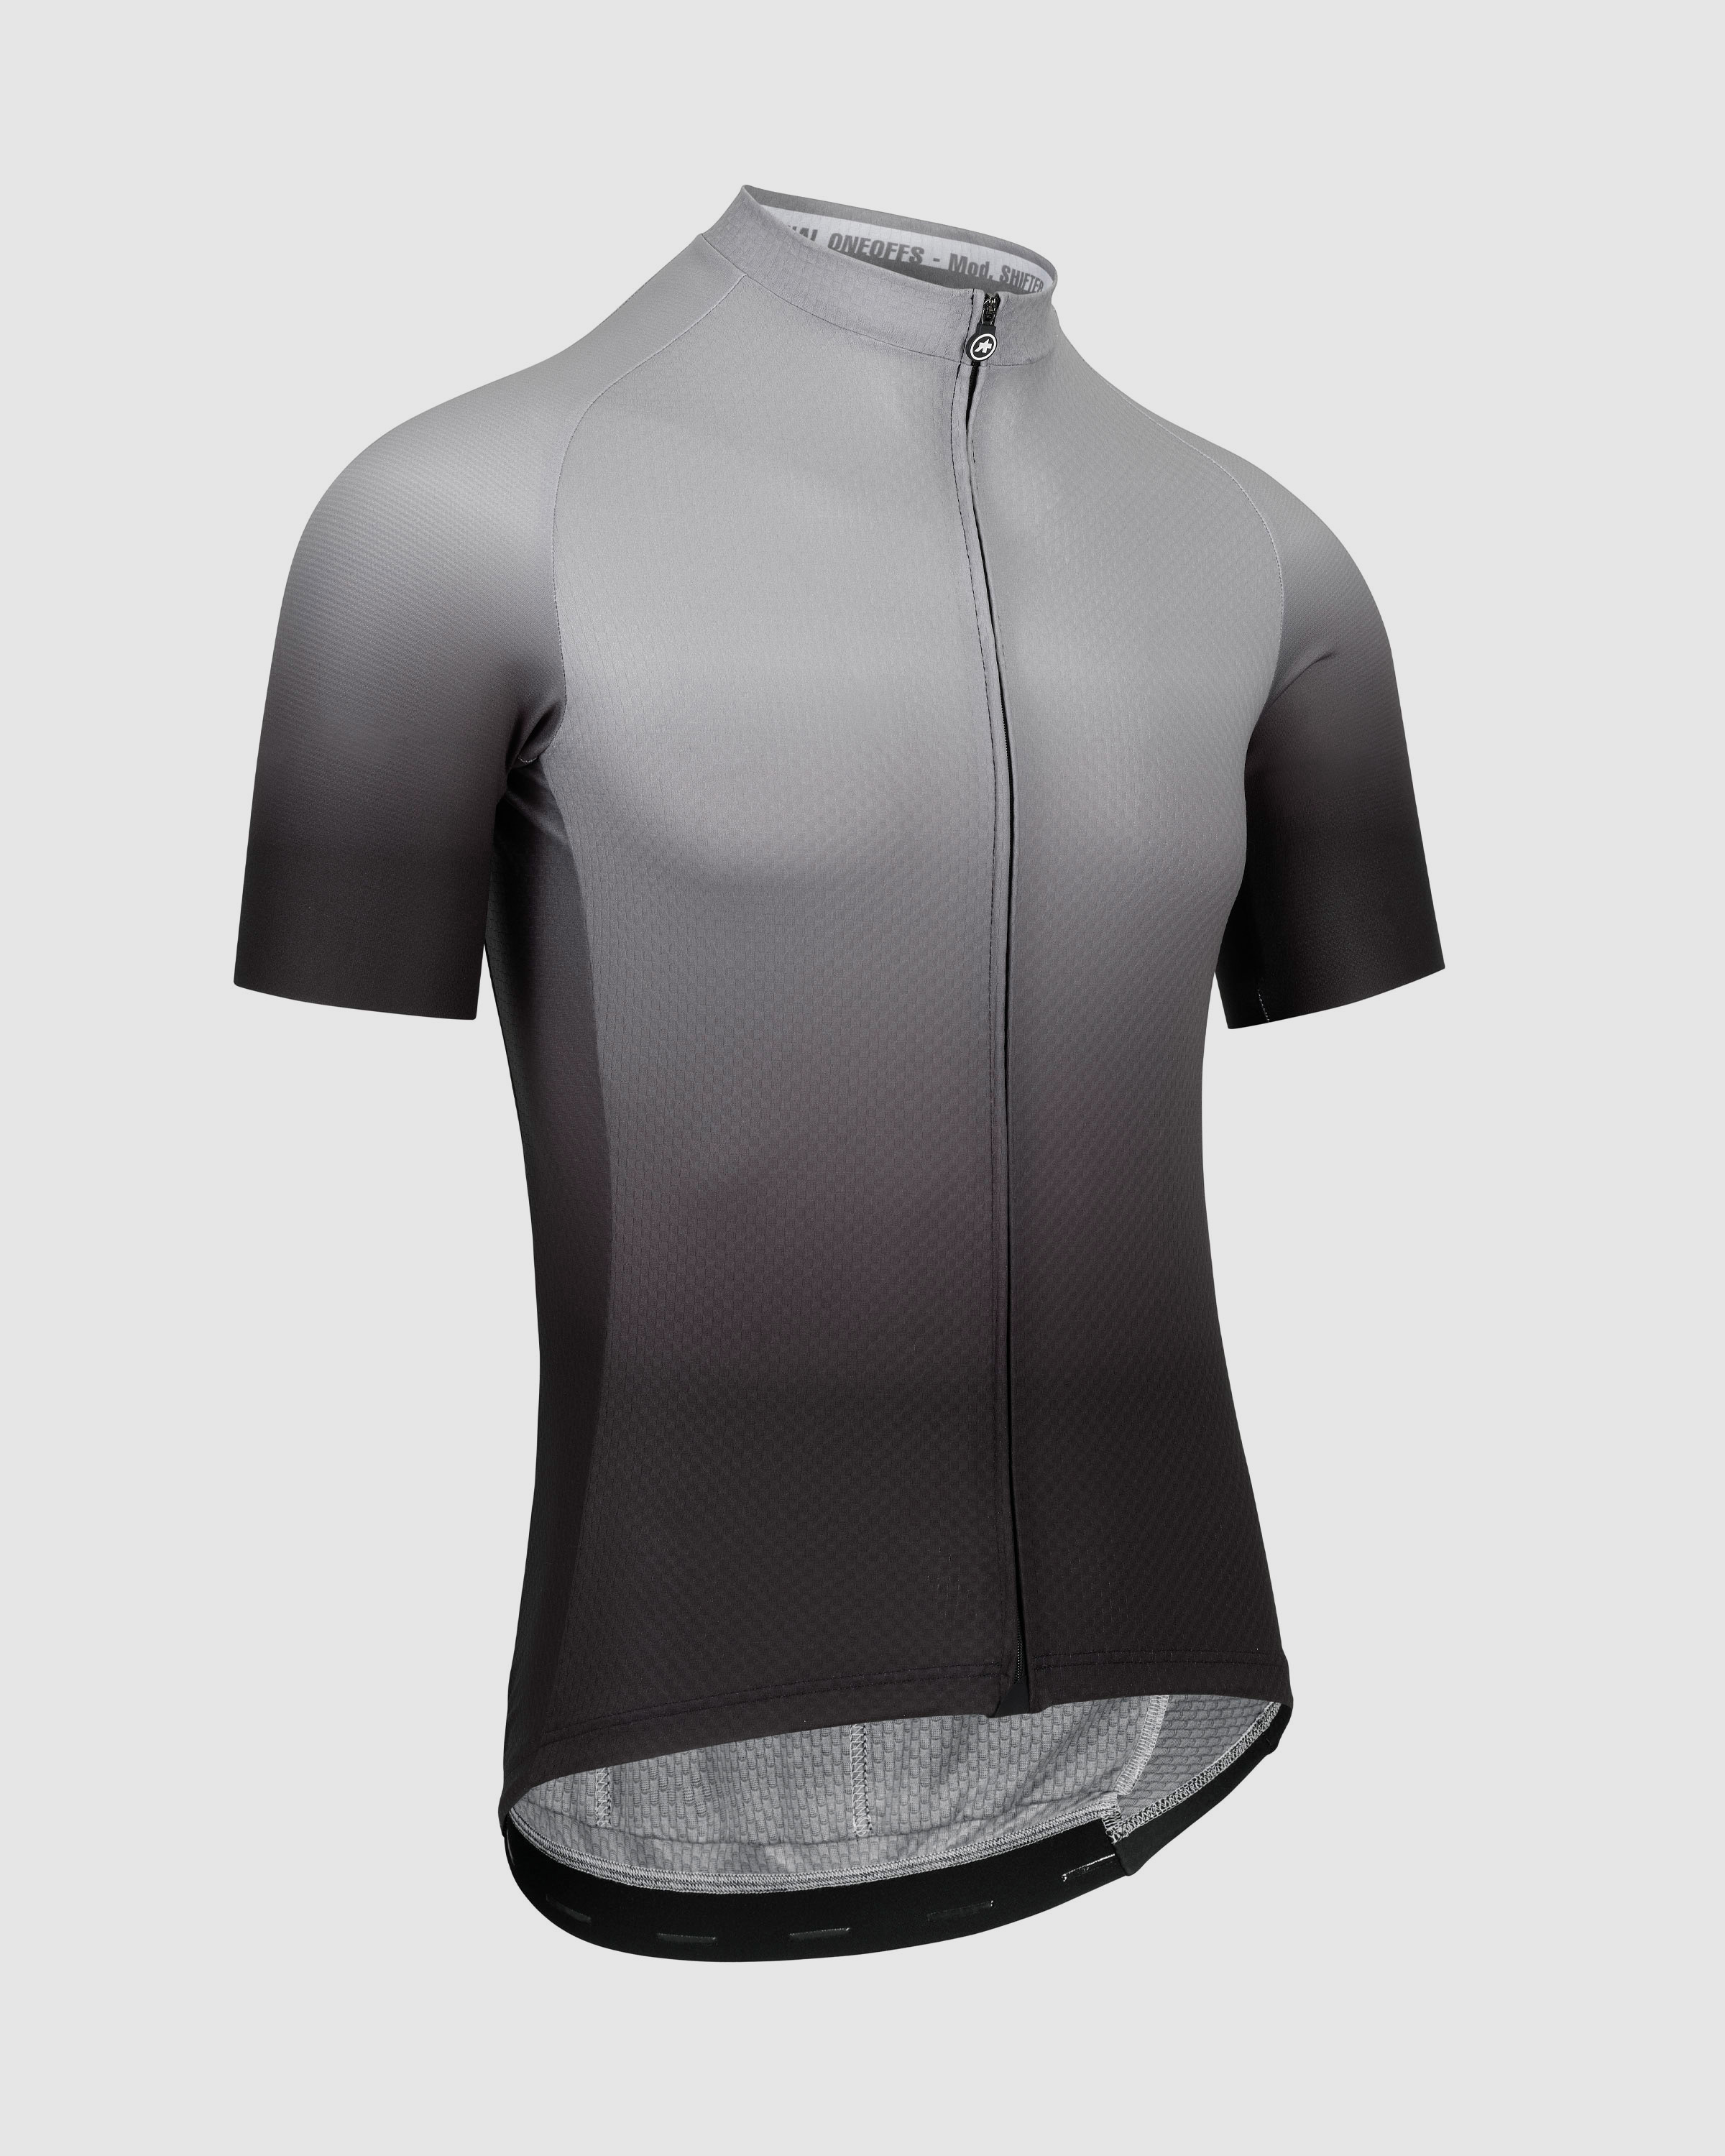 MILLE GT Jersey c2 Shifter - ASSOS Of Switzerland - Official Outlet